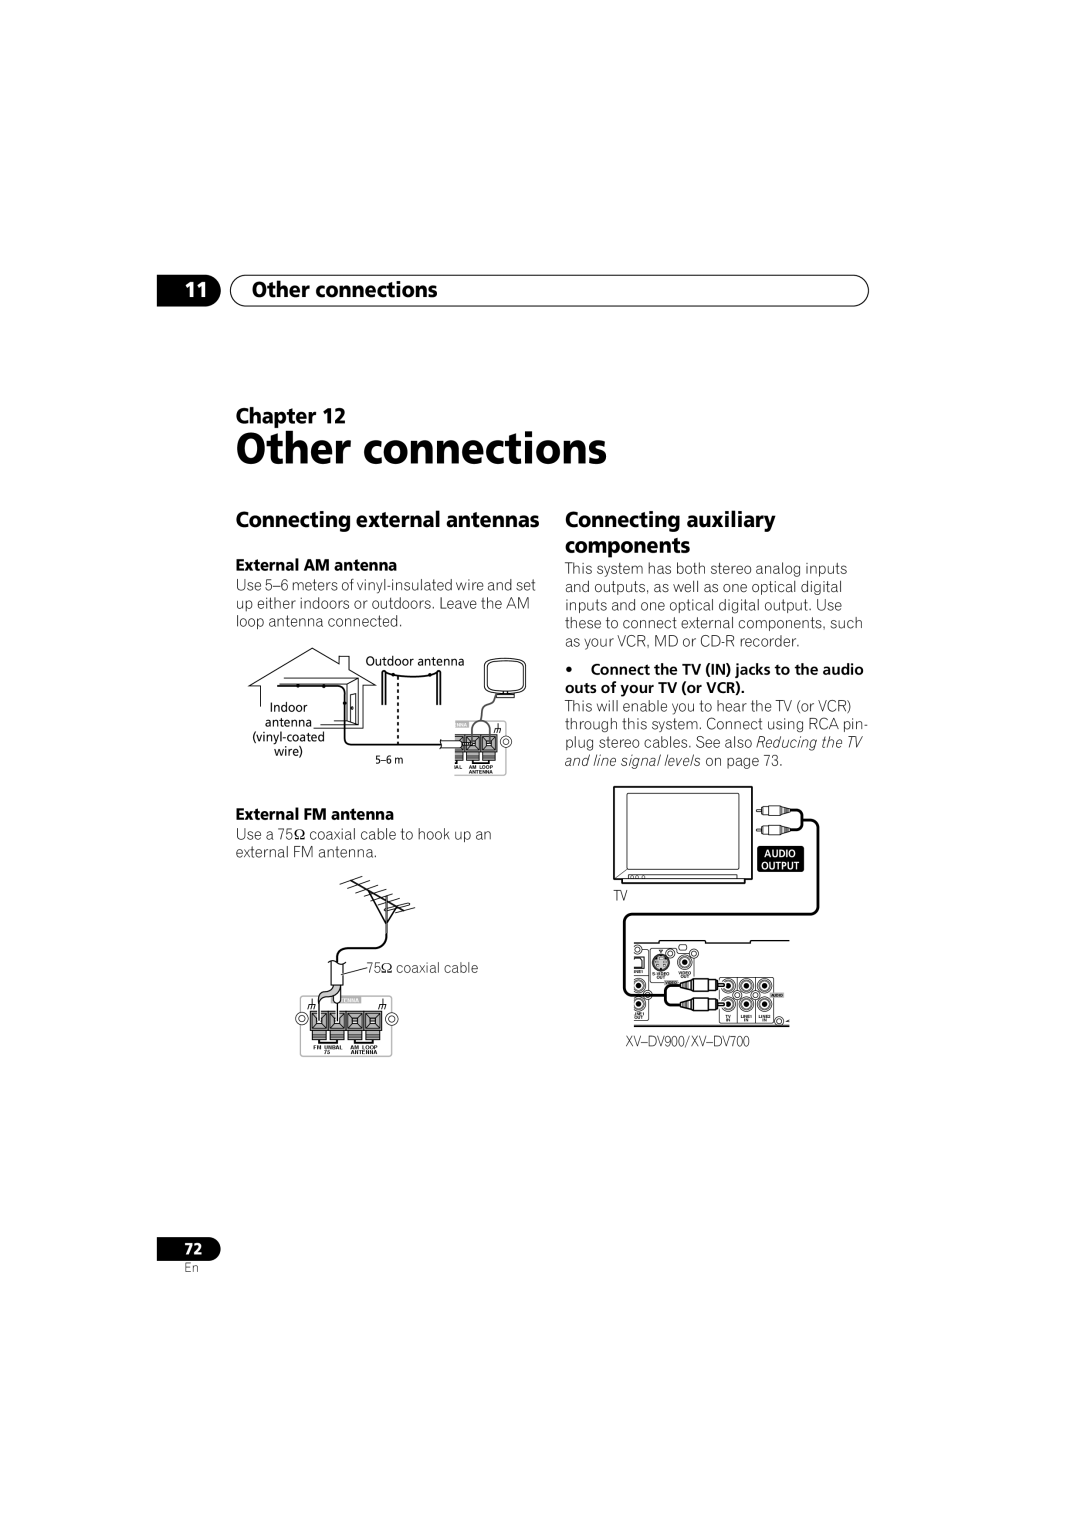 Pioneer XV-DV900, XV-DV700 11Other connections Chapter, Connecting external antennas, Connecting auxiliary components 